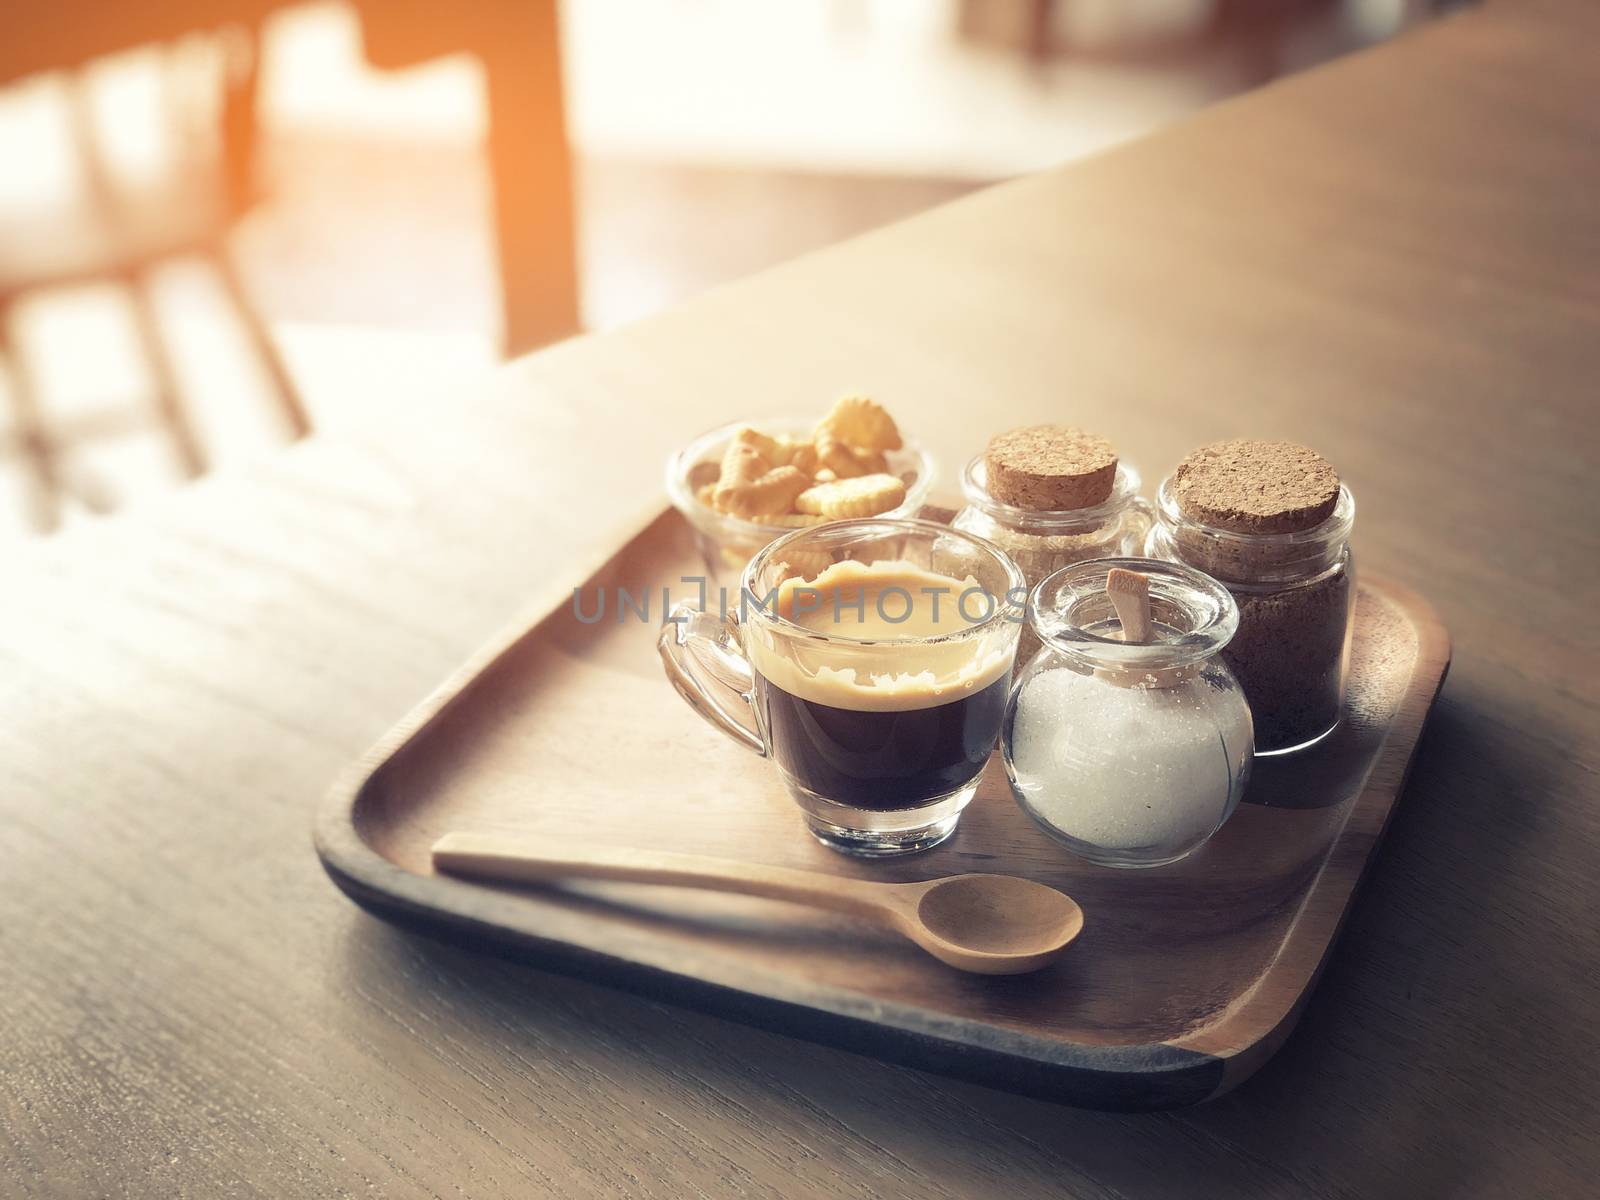 Espresso coffee and cracker on wooden table background by Surasak